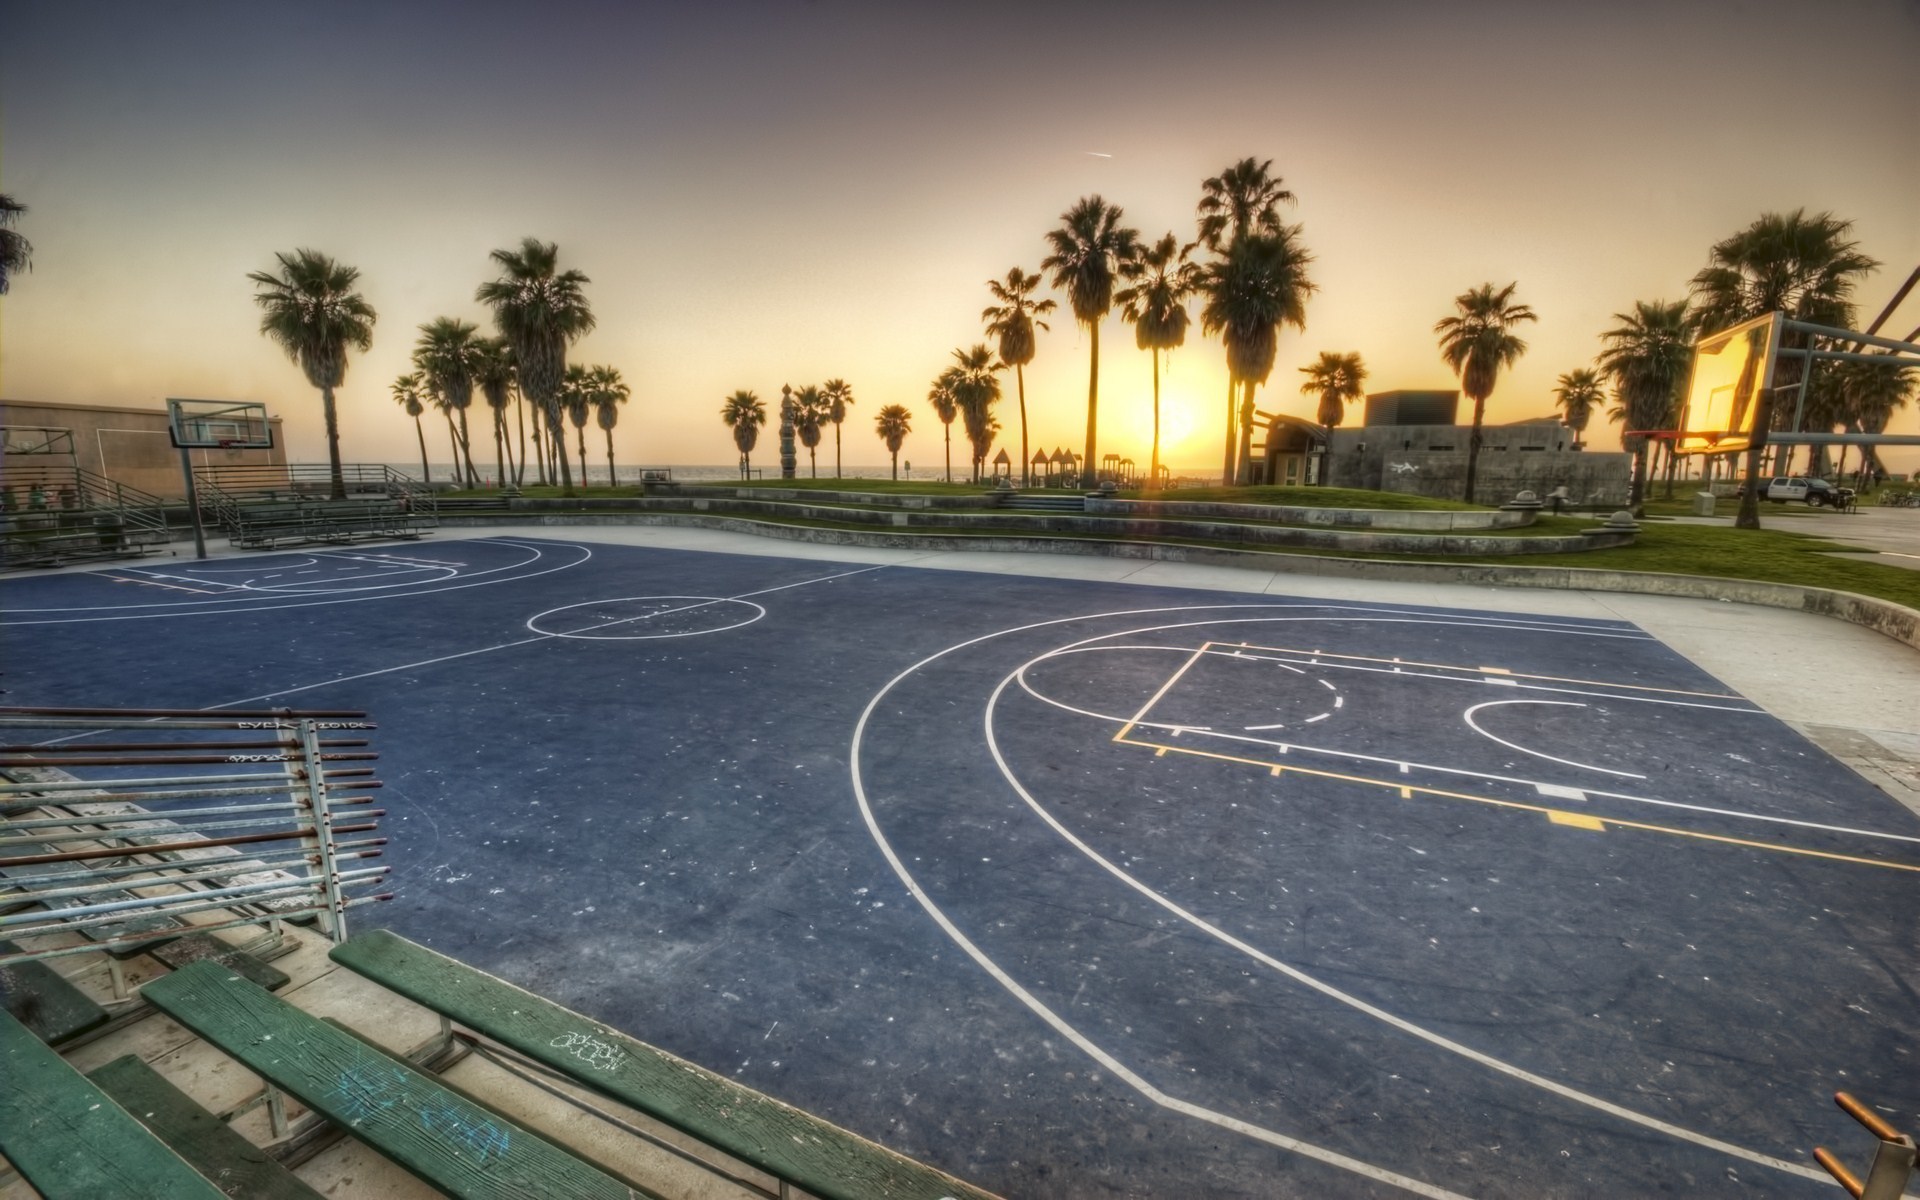 Venice Beach For A Pickup Basketball Game This Weekend Weekendtrips